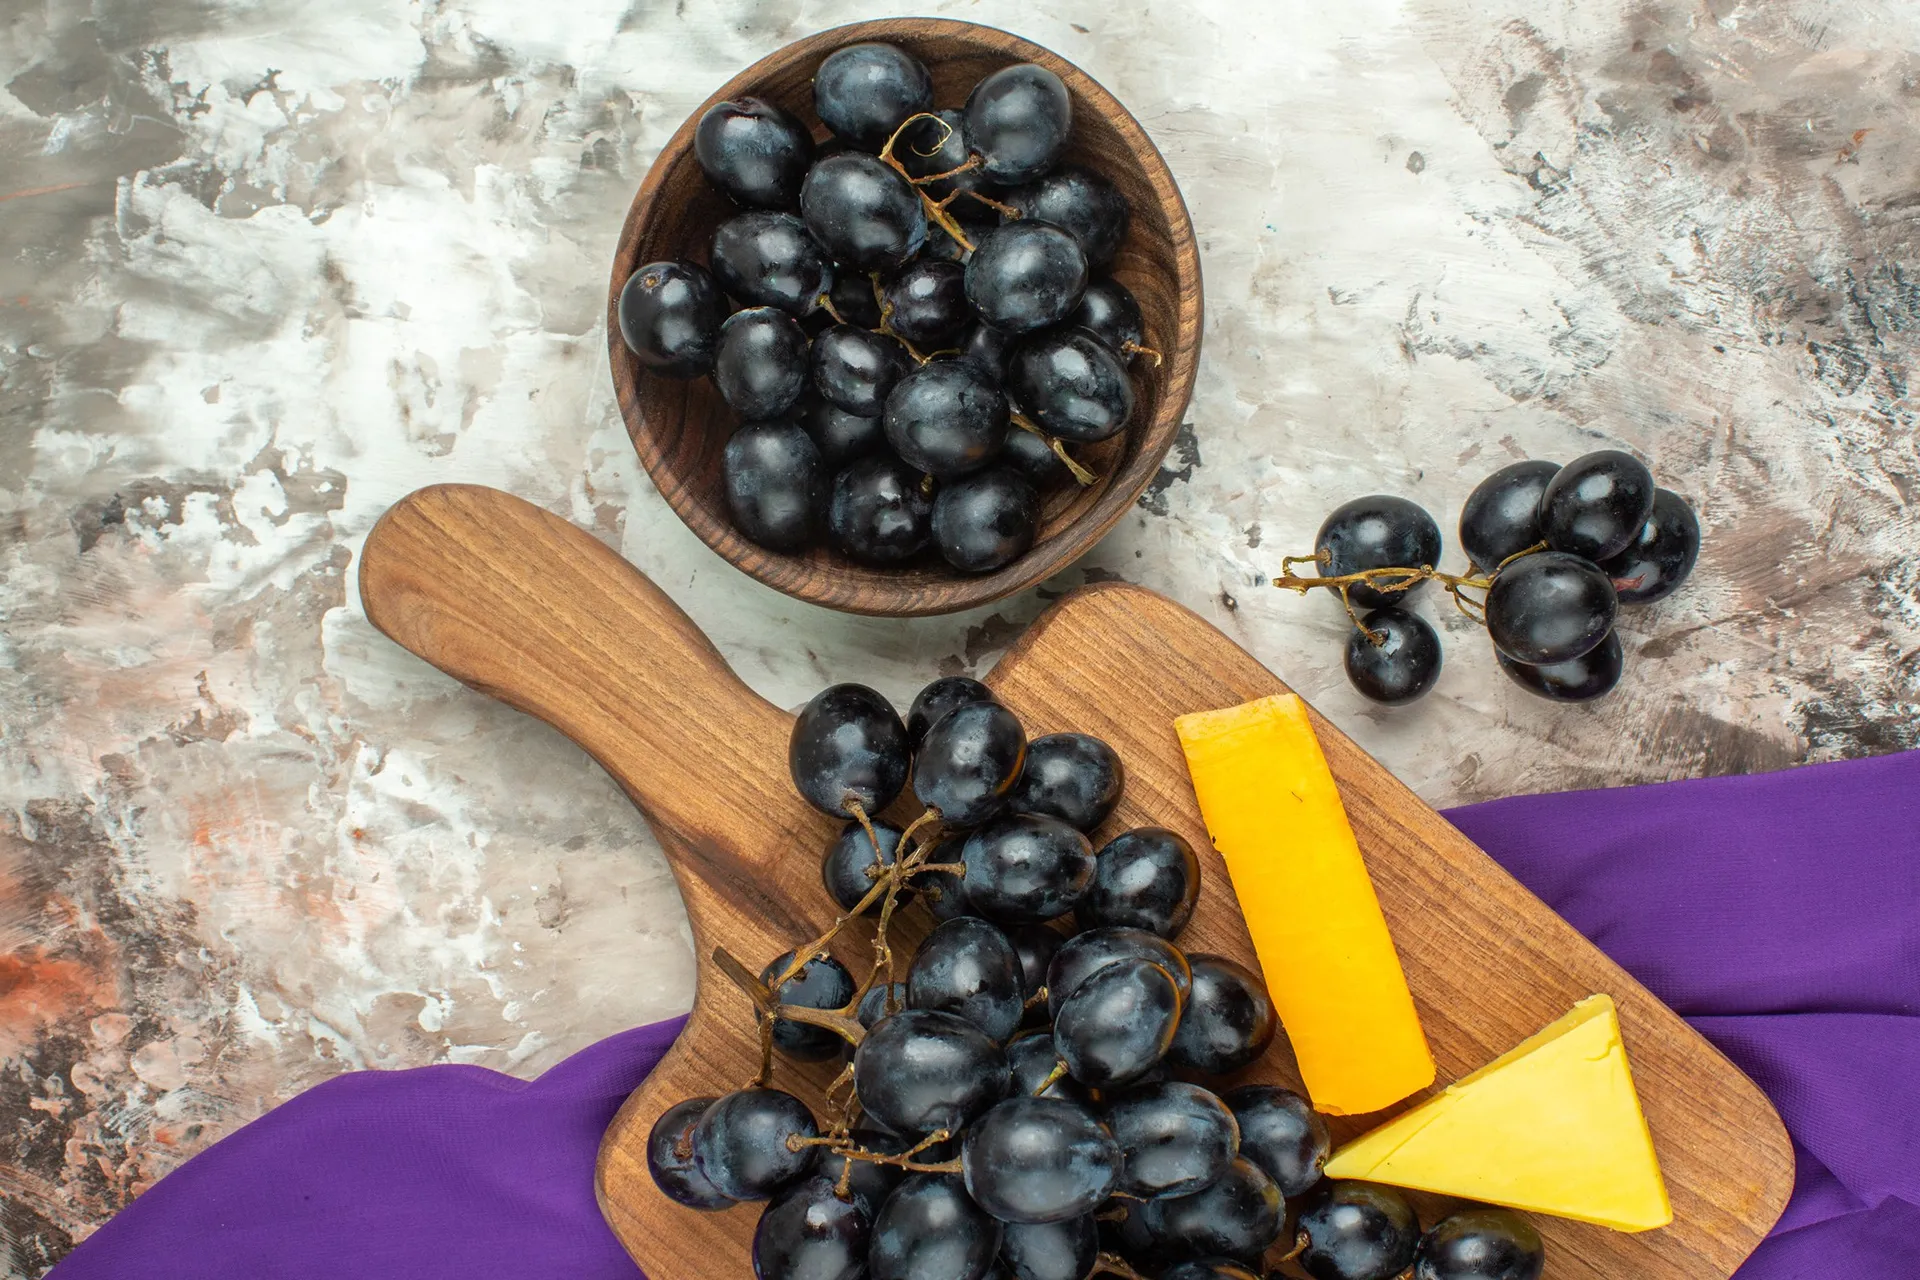 Black Grapes Benefits in daily diet